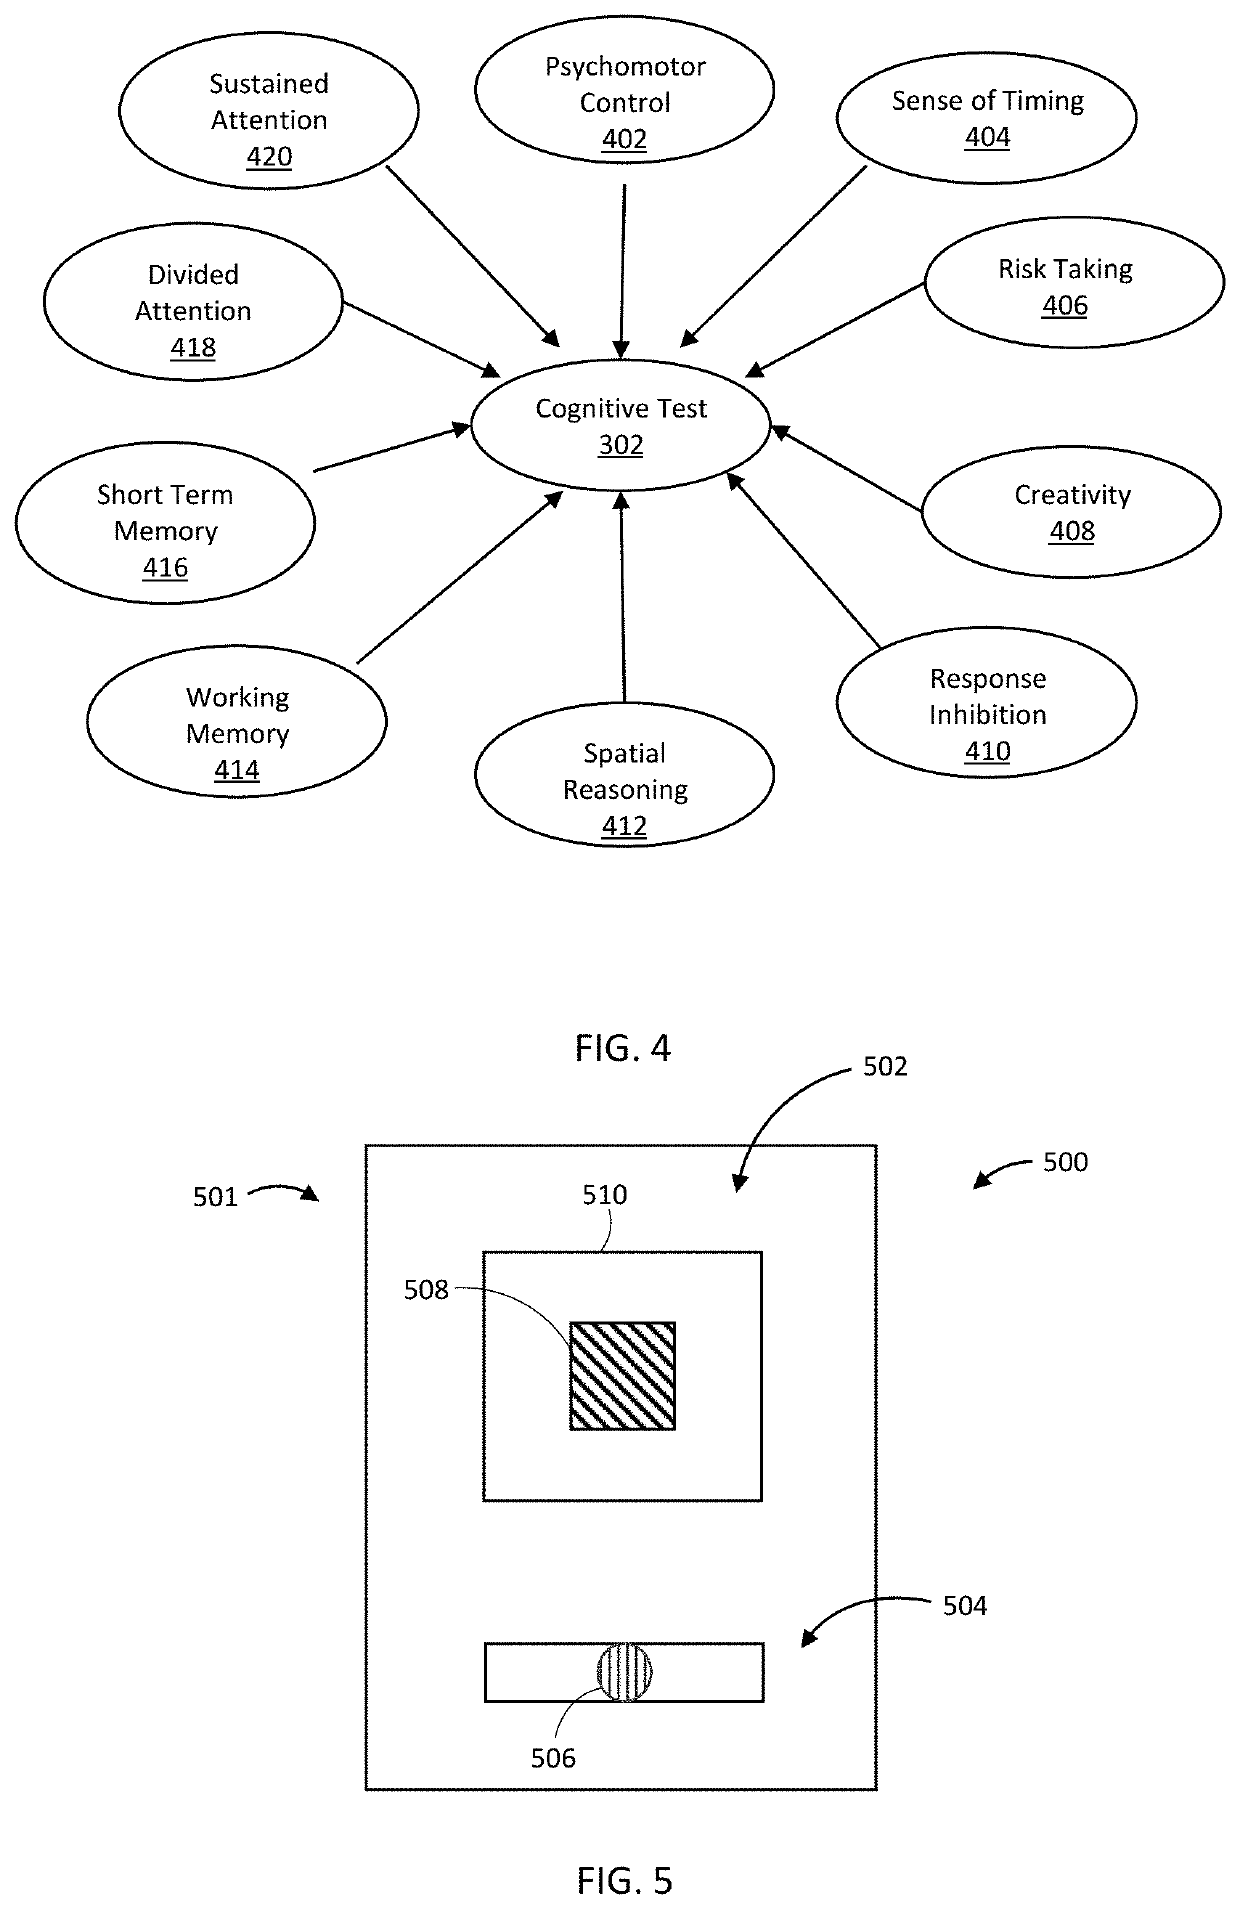 Digital Physiological Neurocognitive and Behavioral Impairment Assessment Systems and Methods of Using the Same